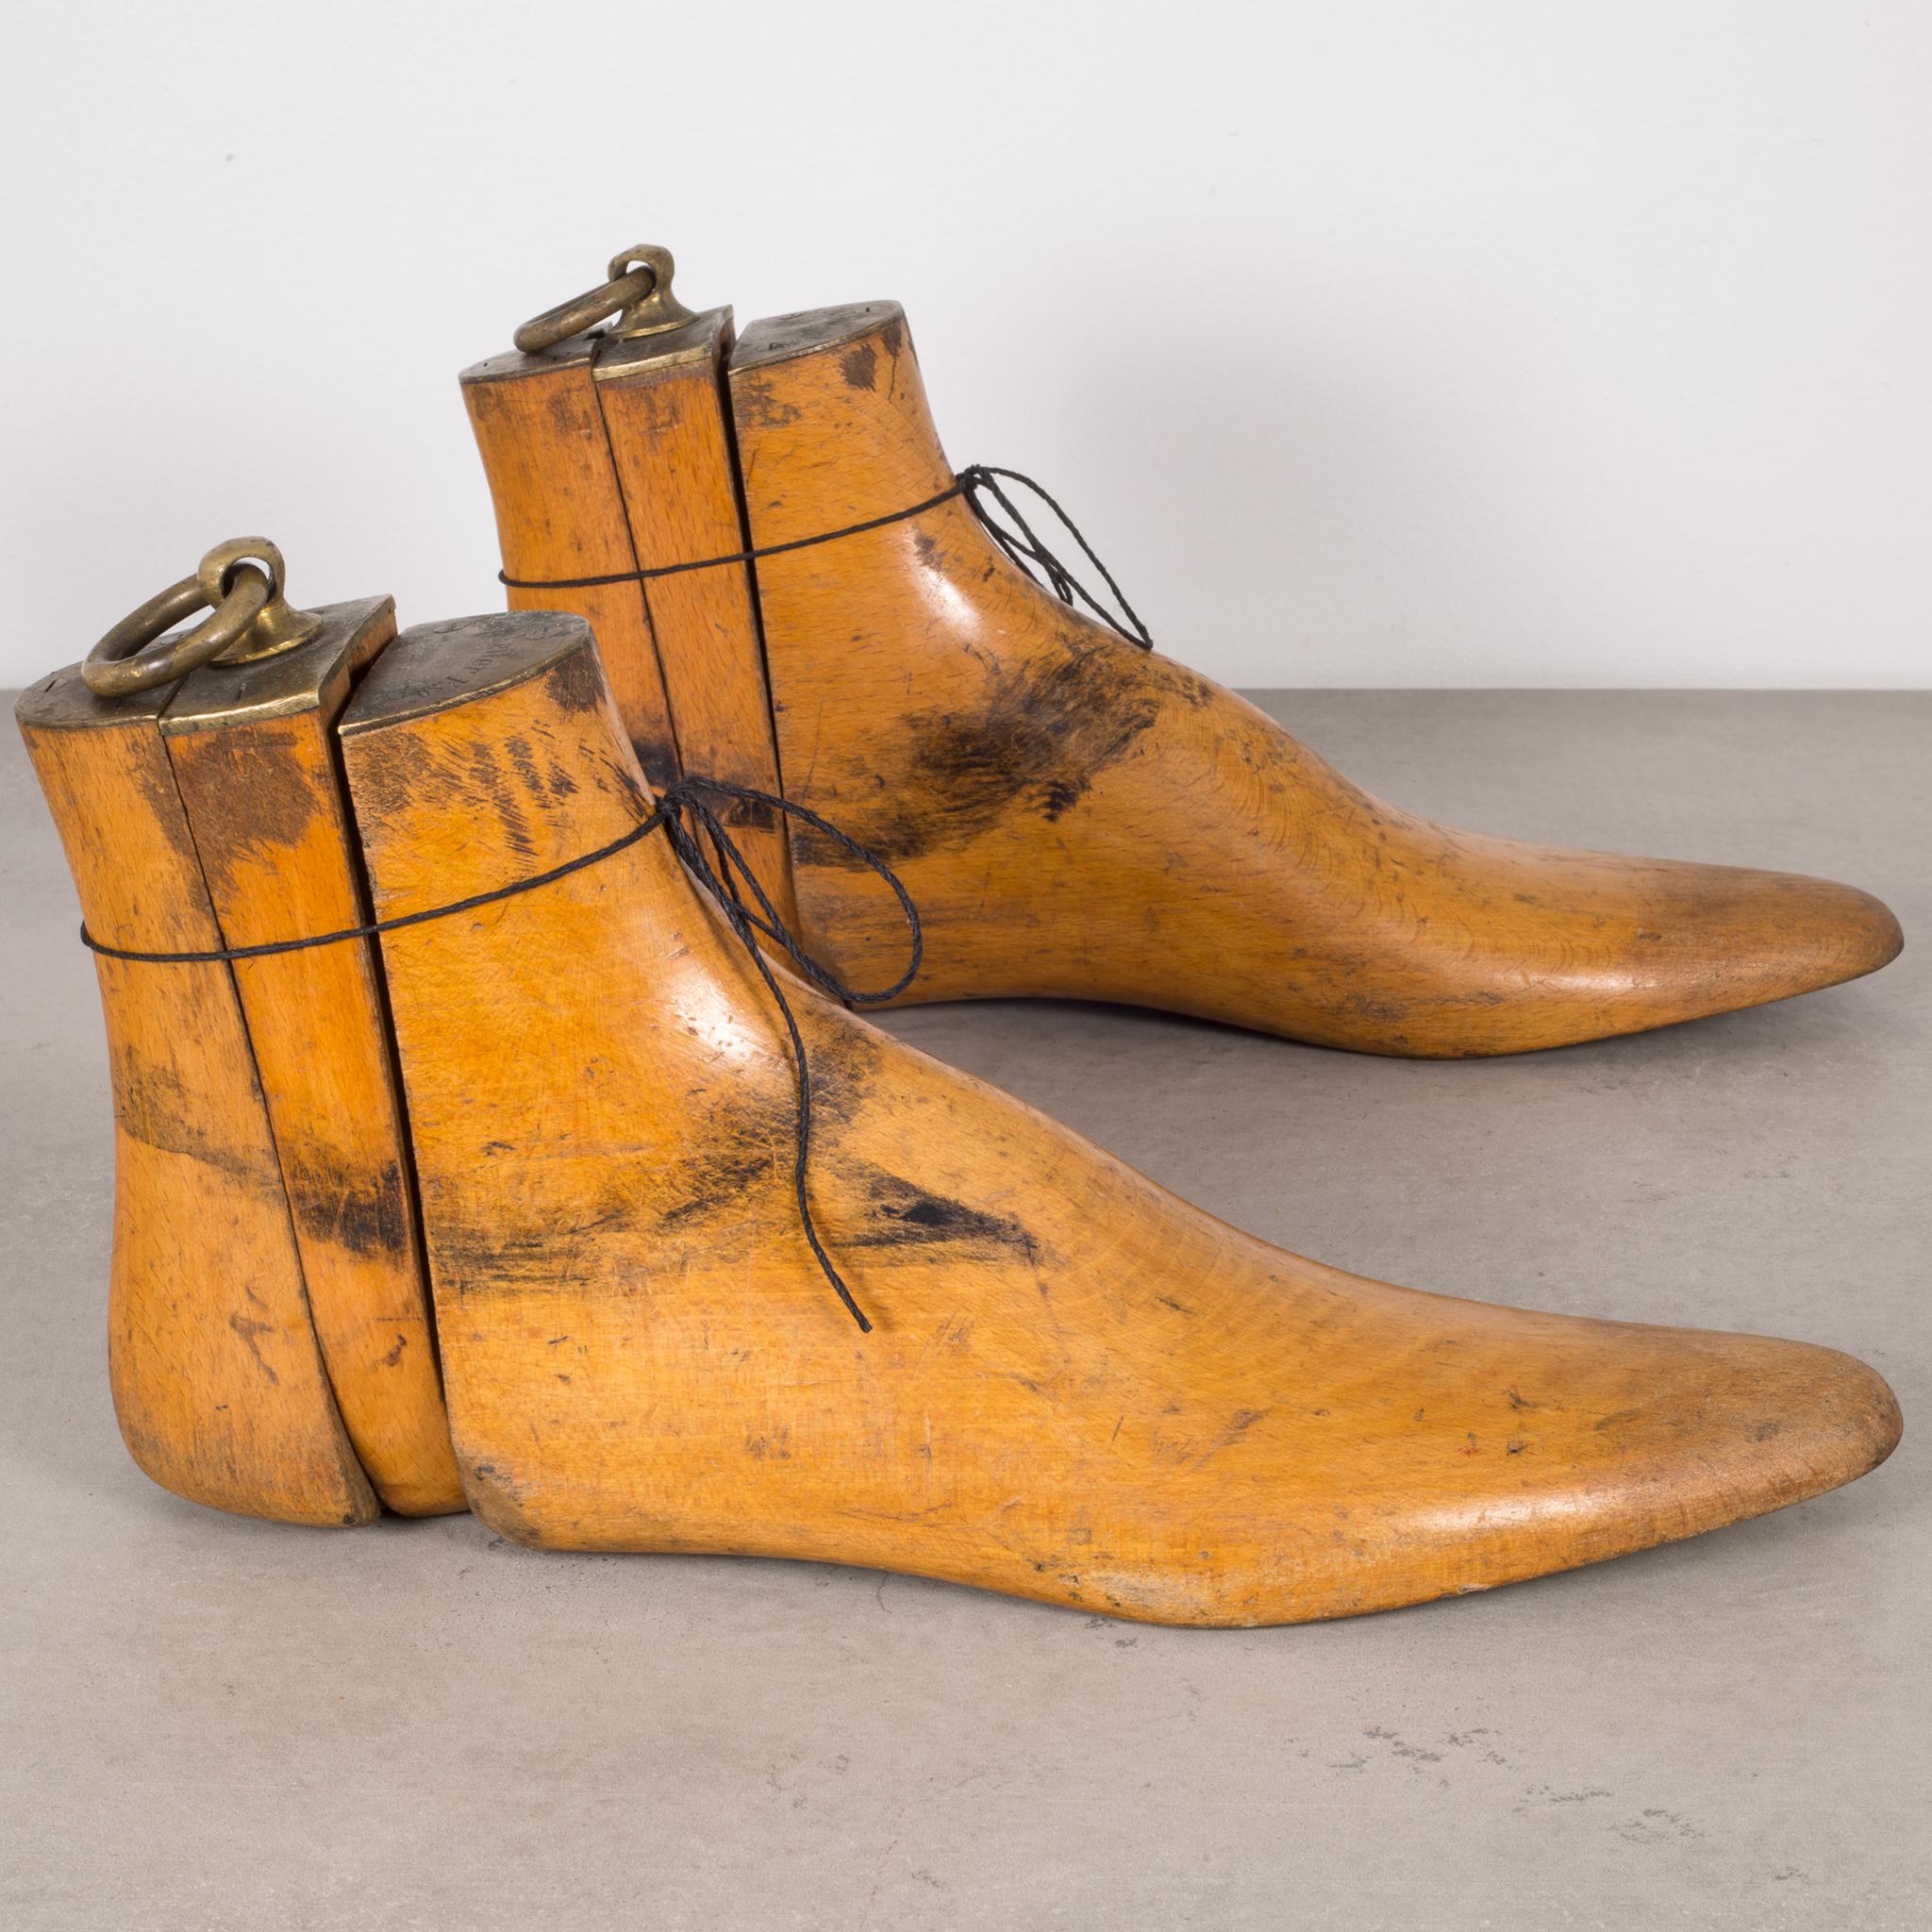 This is an original pair of cobbler's wooden shoe last used to make hand crafted shoes for a certain client. The shoe last were kept at the cobbler's shop for custom shoes when the client requested a pair. These shoe last have the client's name,